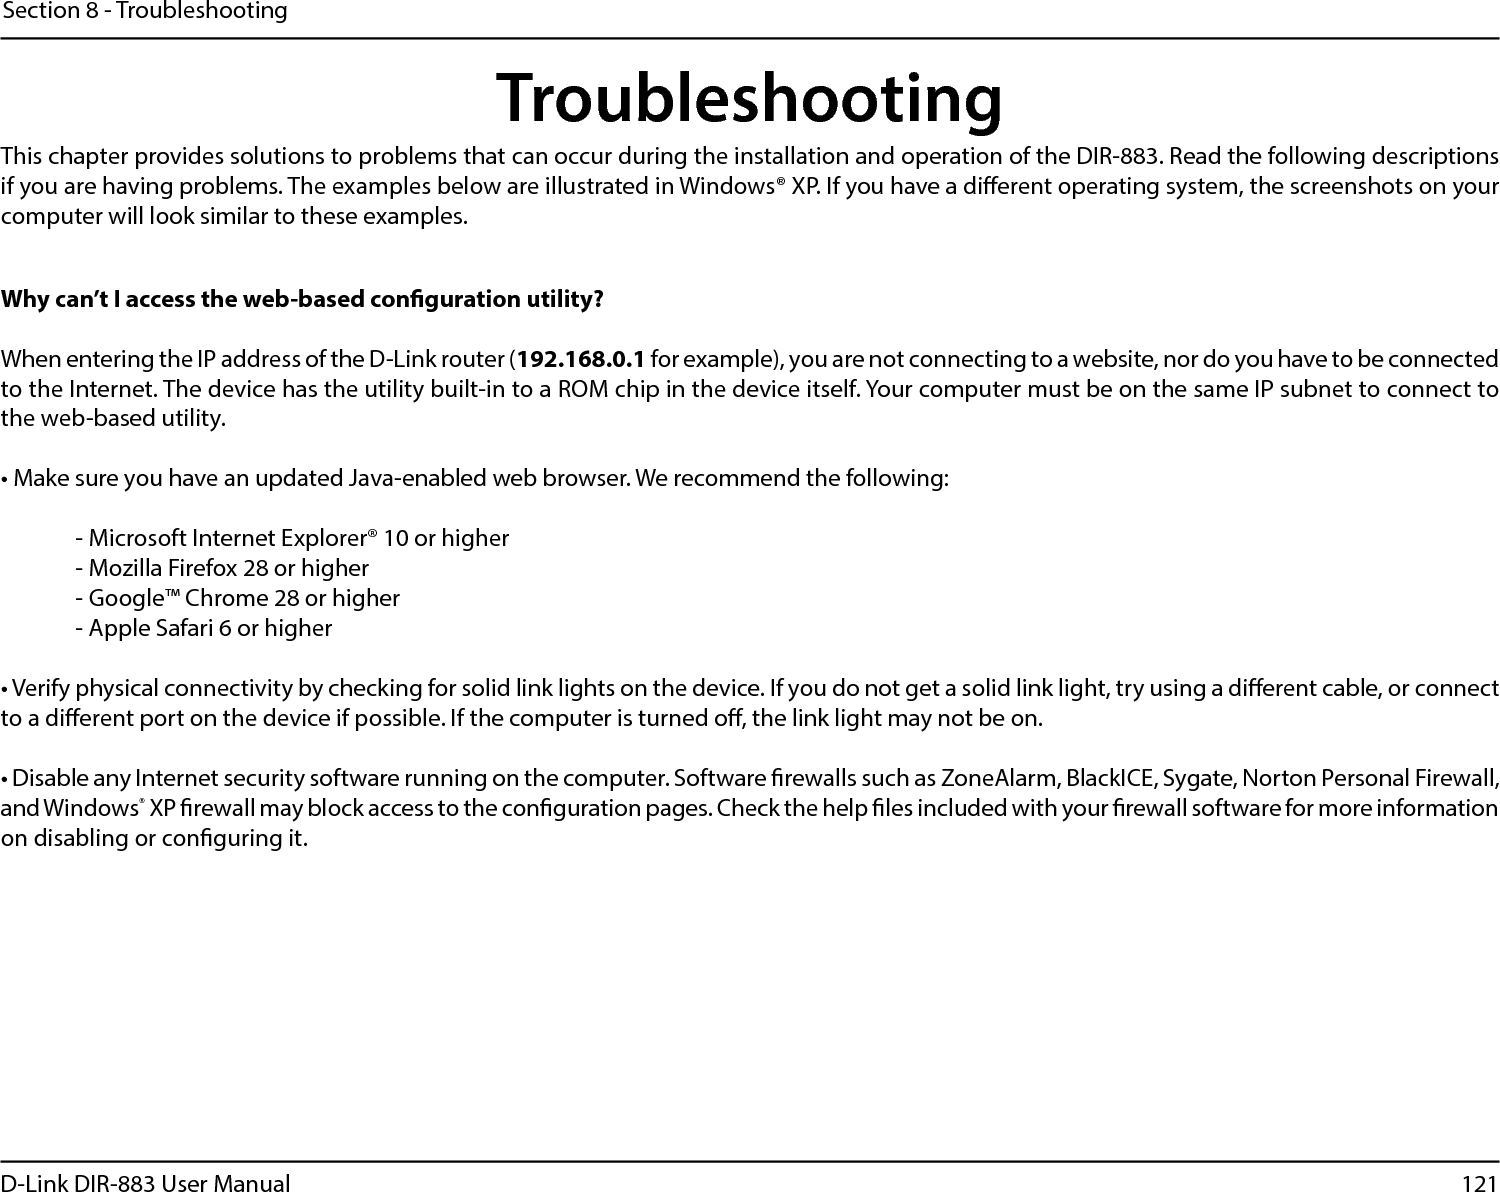 121D-Link DIR-883 User ManualSection 8 - TroubleshootingTroubleshootingThis chapter provides solutions to problems that can occur during the installation and operation of the DIR-883. Read the following descriptions if you are having problems. The examples below are illustrated in Windows® XP. If you have a dierent operating system, the screenshots on your computer will look similar to these examples.Why can’t I access the web-based conguration utility?When entering the IP address of the D-Link router (192.168.0.1 for example), you are not connecting to a website, nor do you have to be connected to the Internet. The device has the utility built-in to a ROM chip in the device itself. Your computer must be on the same IP subnet to connect to the web-based utility. • Make sure you have an updated Java-enabled web browser. We recommend the following: - Microsoft Internet Explorer® 10 or higher- Mozilla Firefox 28 or higher- Google™ Chrome 28 or higher- Apple Safari 6 or higher• Verify physical connectivity by checking for solid link lights on the device. If you do not get a solid link light, try using a dierent cable, or connect to a dierent port on the device if possible. If the computer is turned o, the link light may not be on.• Disable any Internet security software running on the computer. Software rewalls such as ZoneAlarm, BlackICE, Sygate, Norton Personal Firewall, and Windows® XP rewall may block access to the conguration pages. Check the help les included with your rewall software for more information on disabling or conguring it.